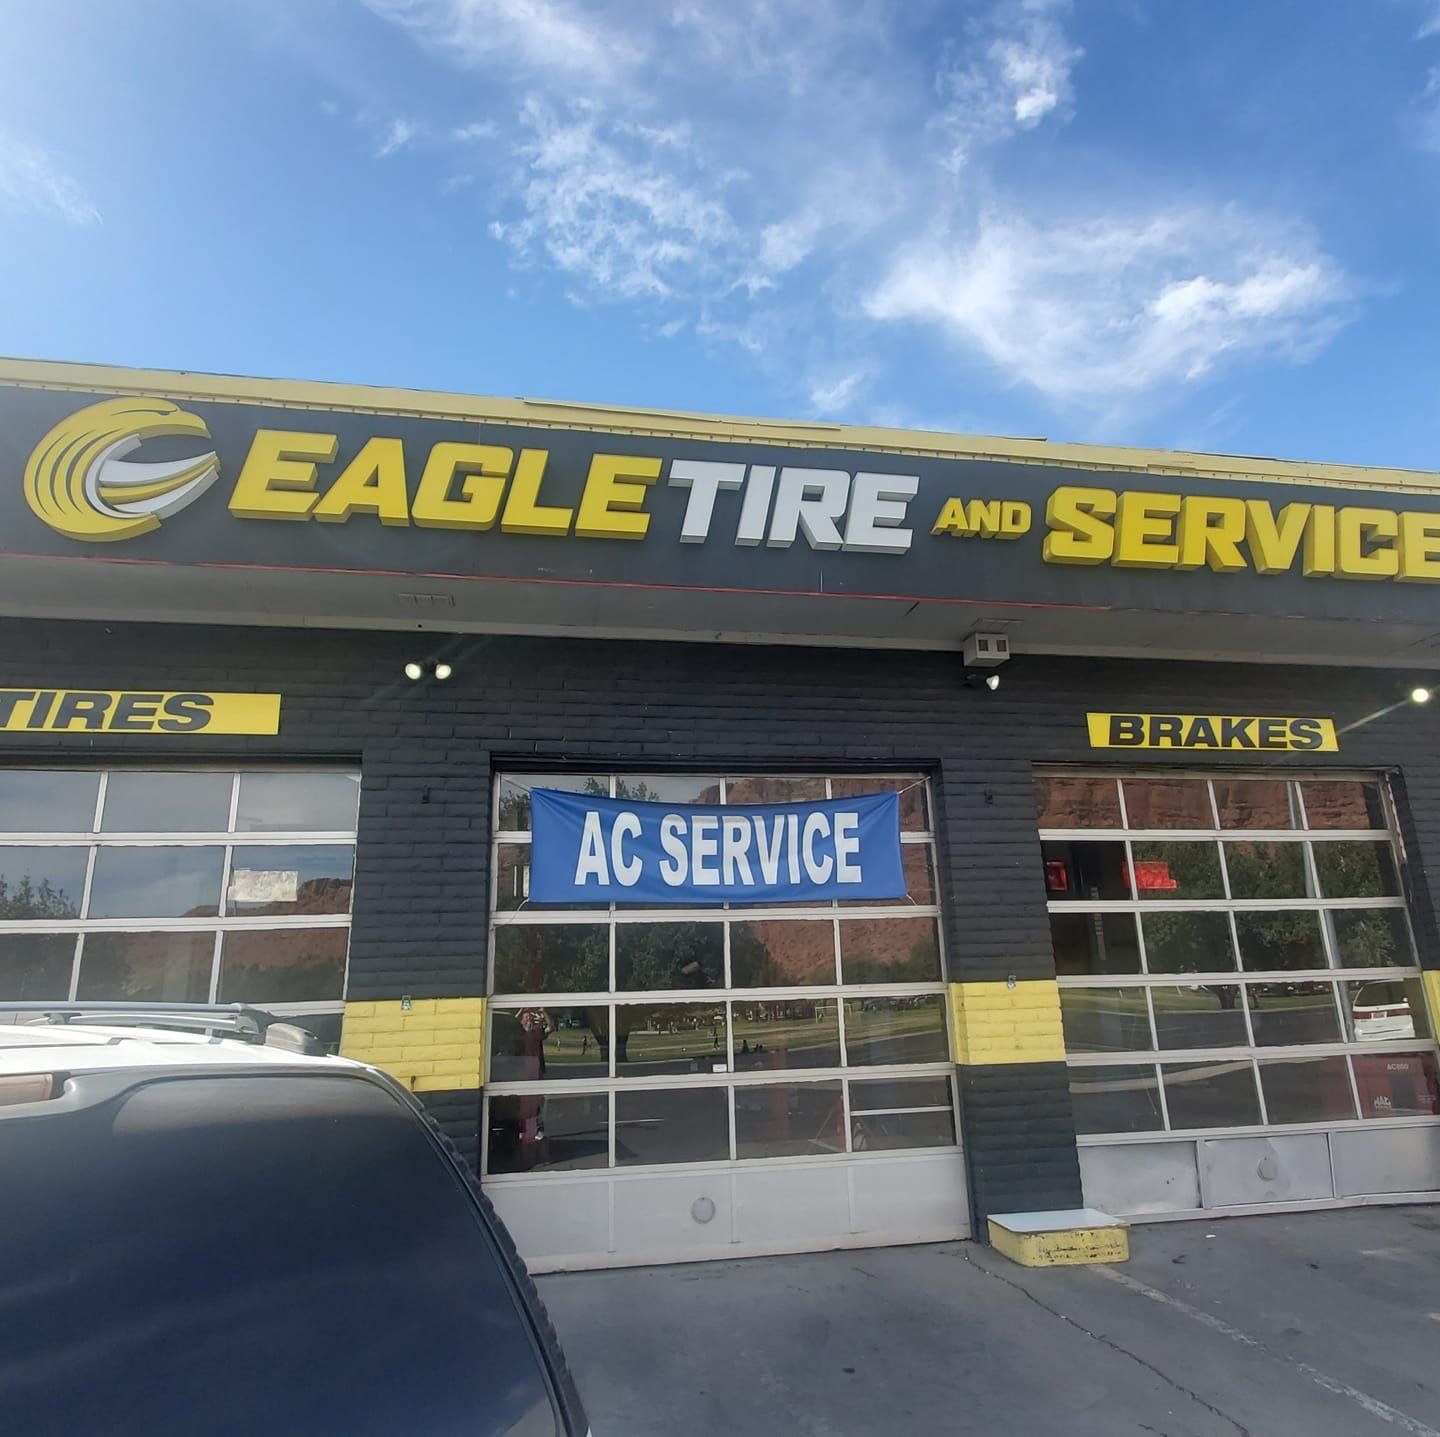 Eagle Tire: Bluff St location in St. George, UT